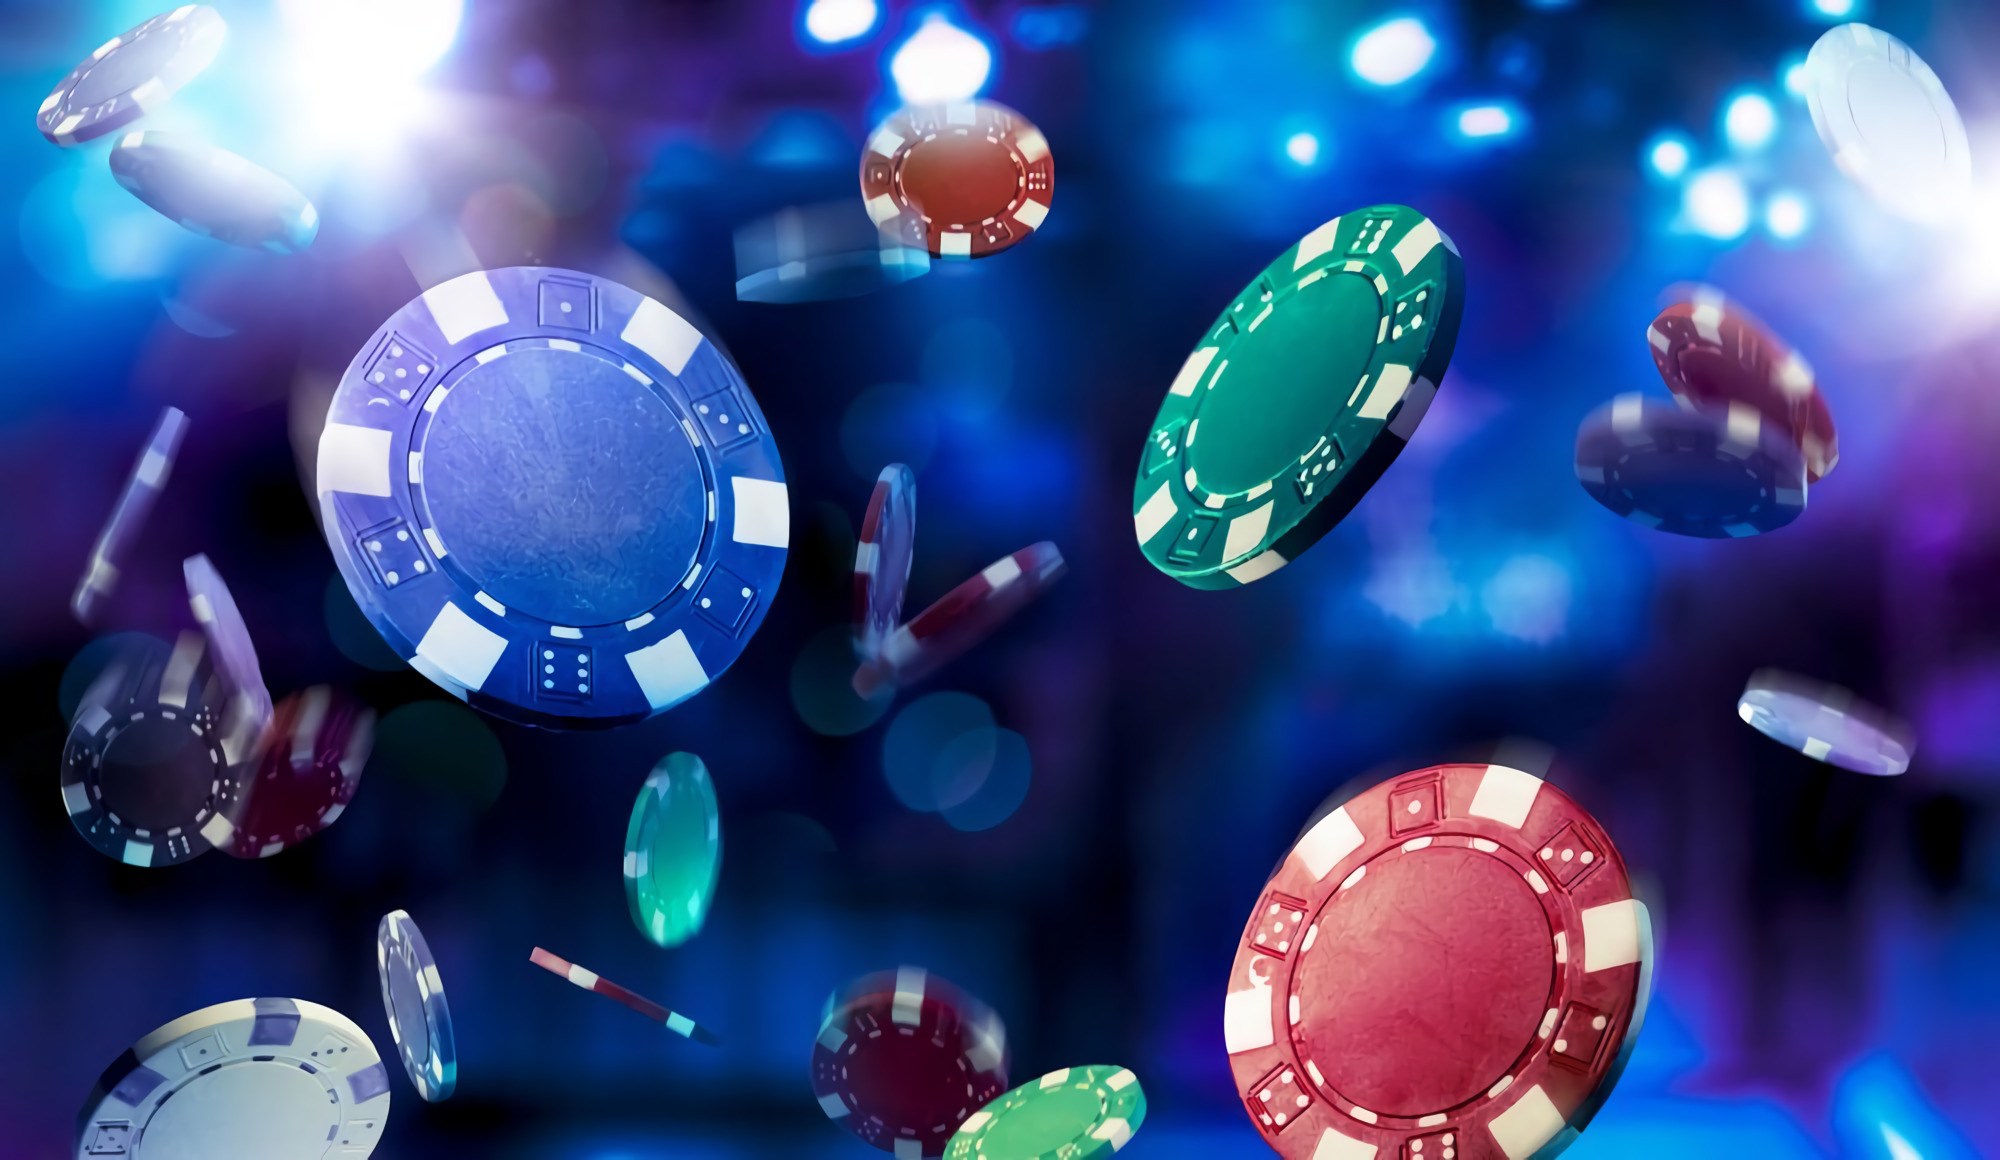 Slot machine illustration depicting the seven available virtual casino games at Bitcasino, where players may wager and win real money with no outlay of their own